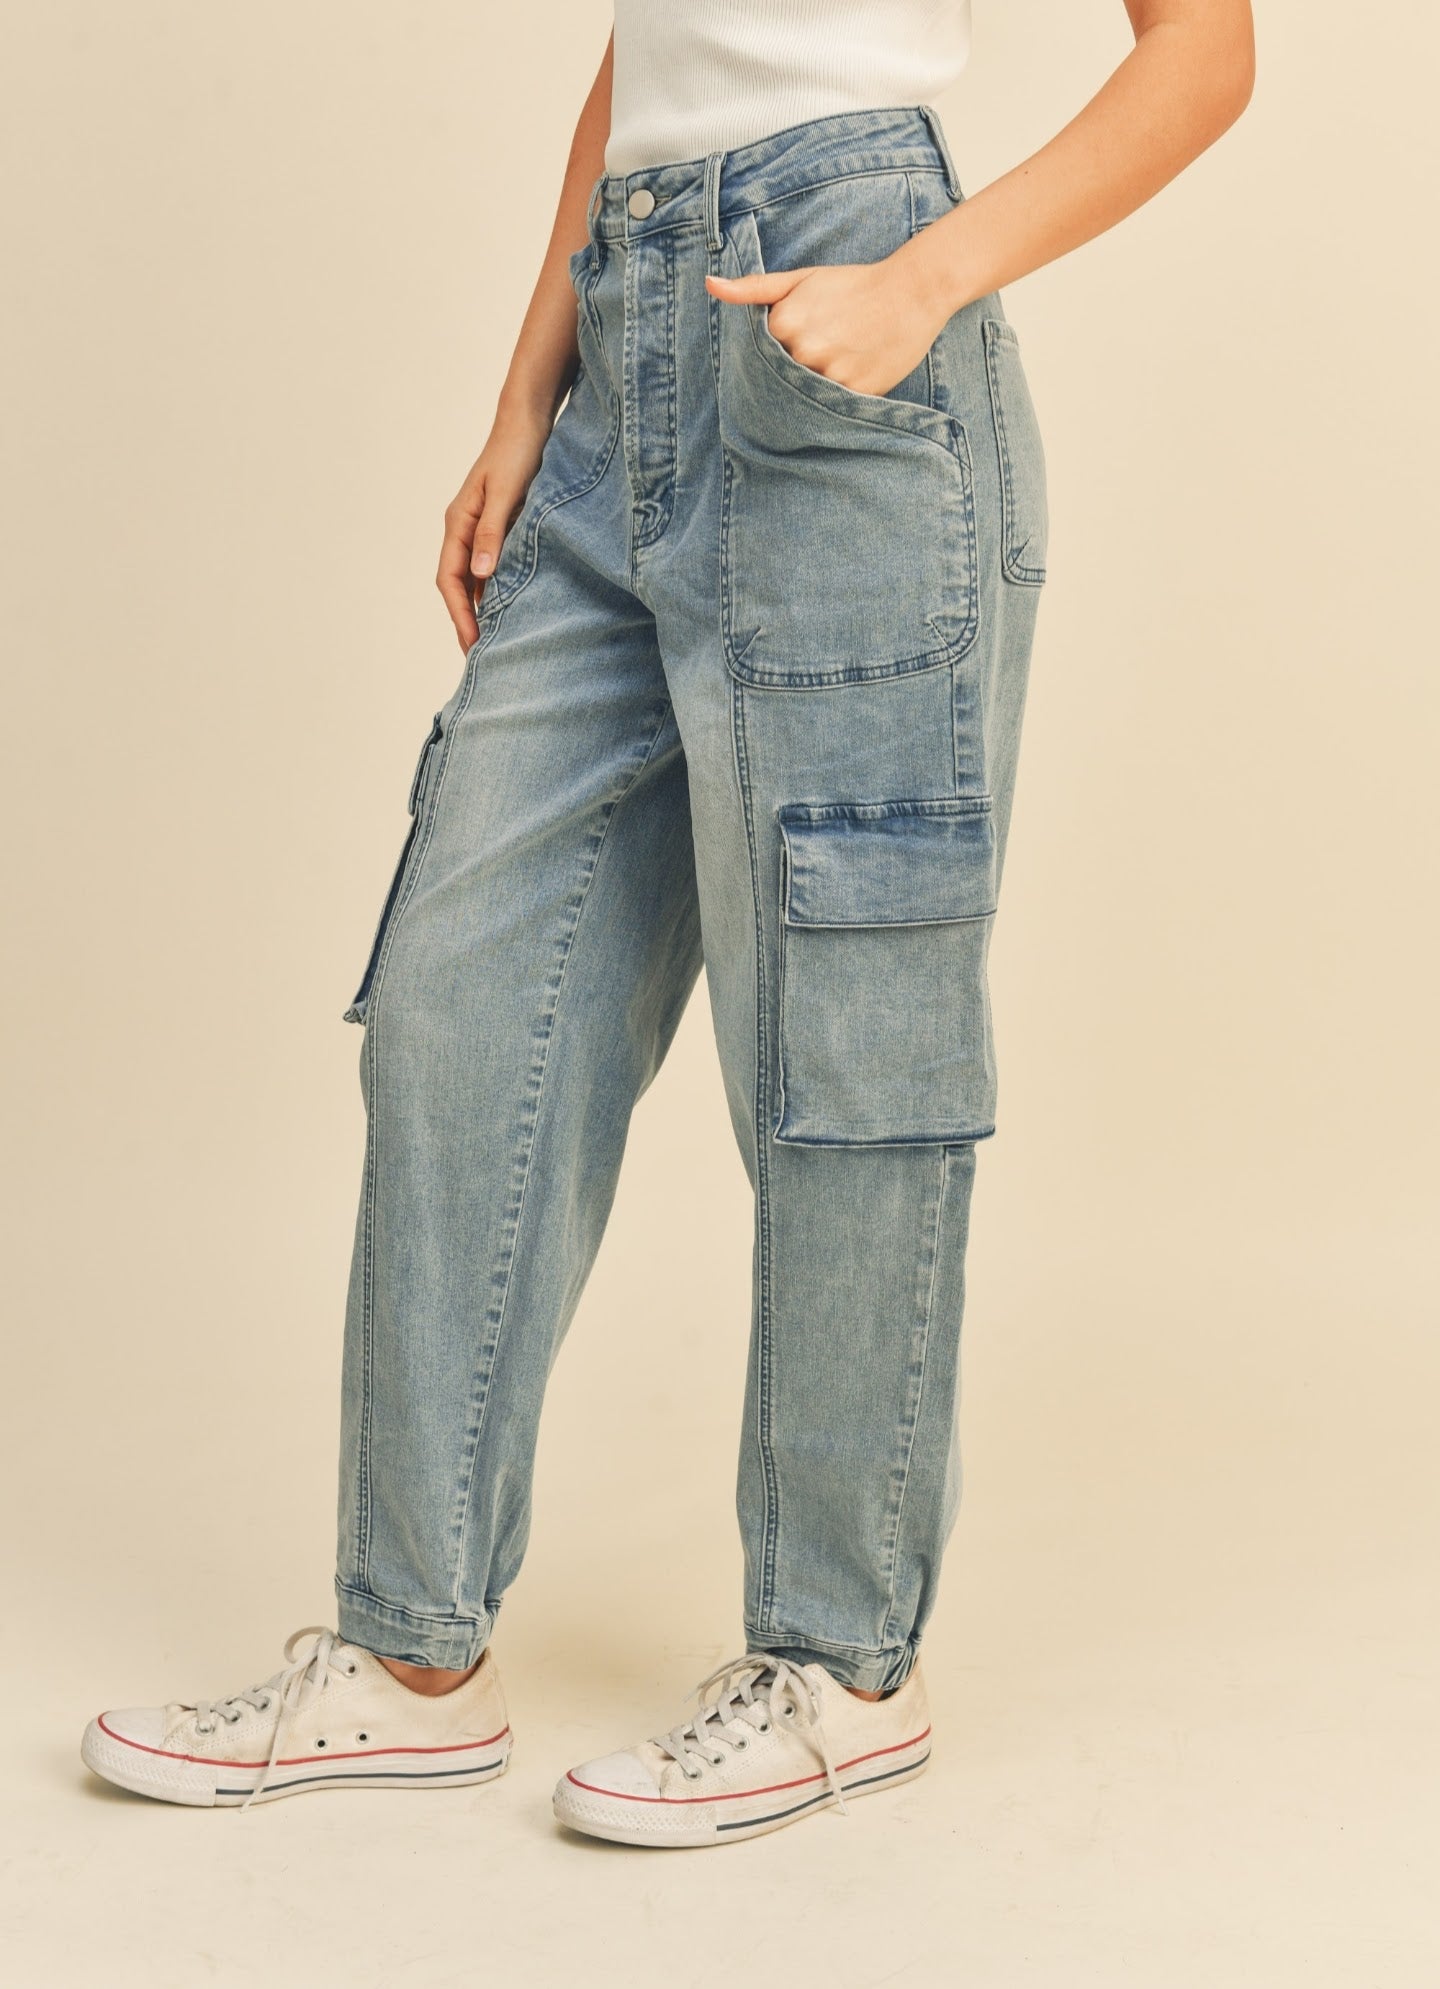 The Washed Denim Cargo Pants